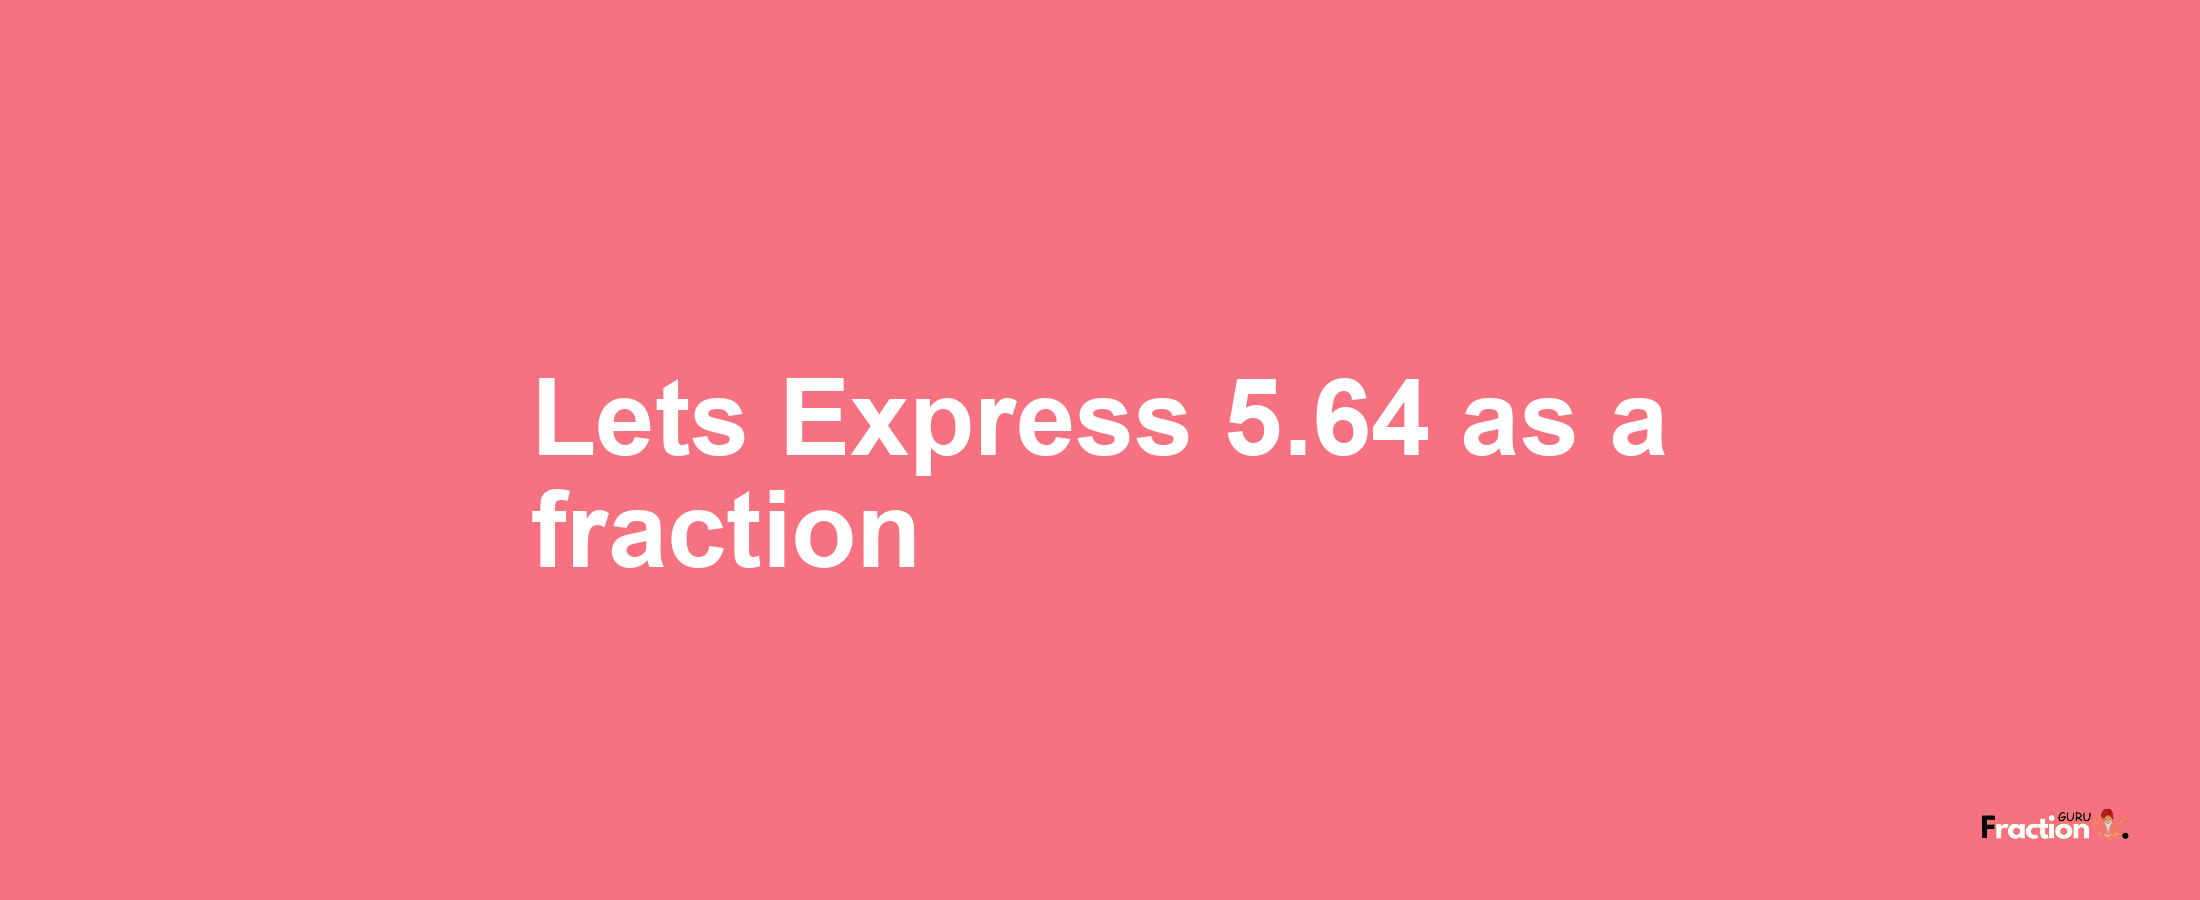 Lets Express 5.64 as afraction